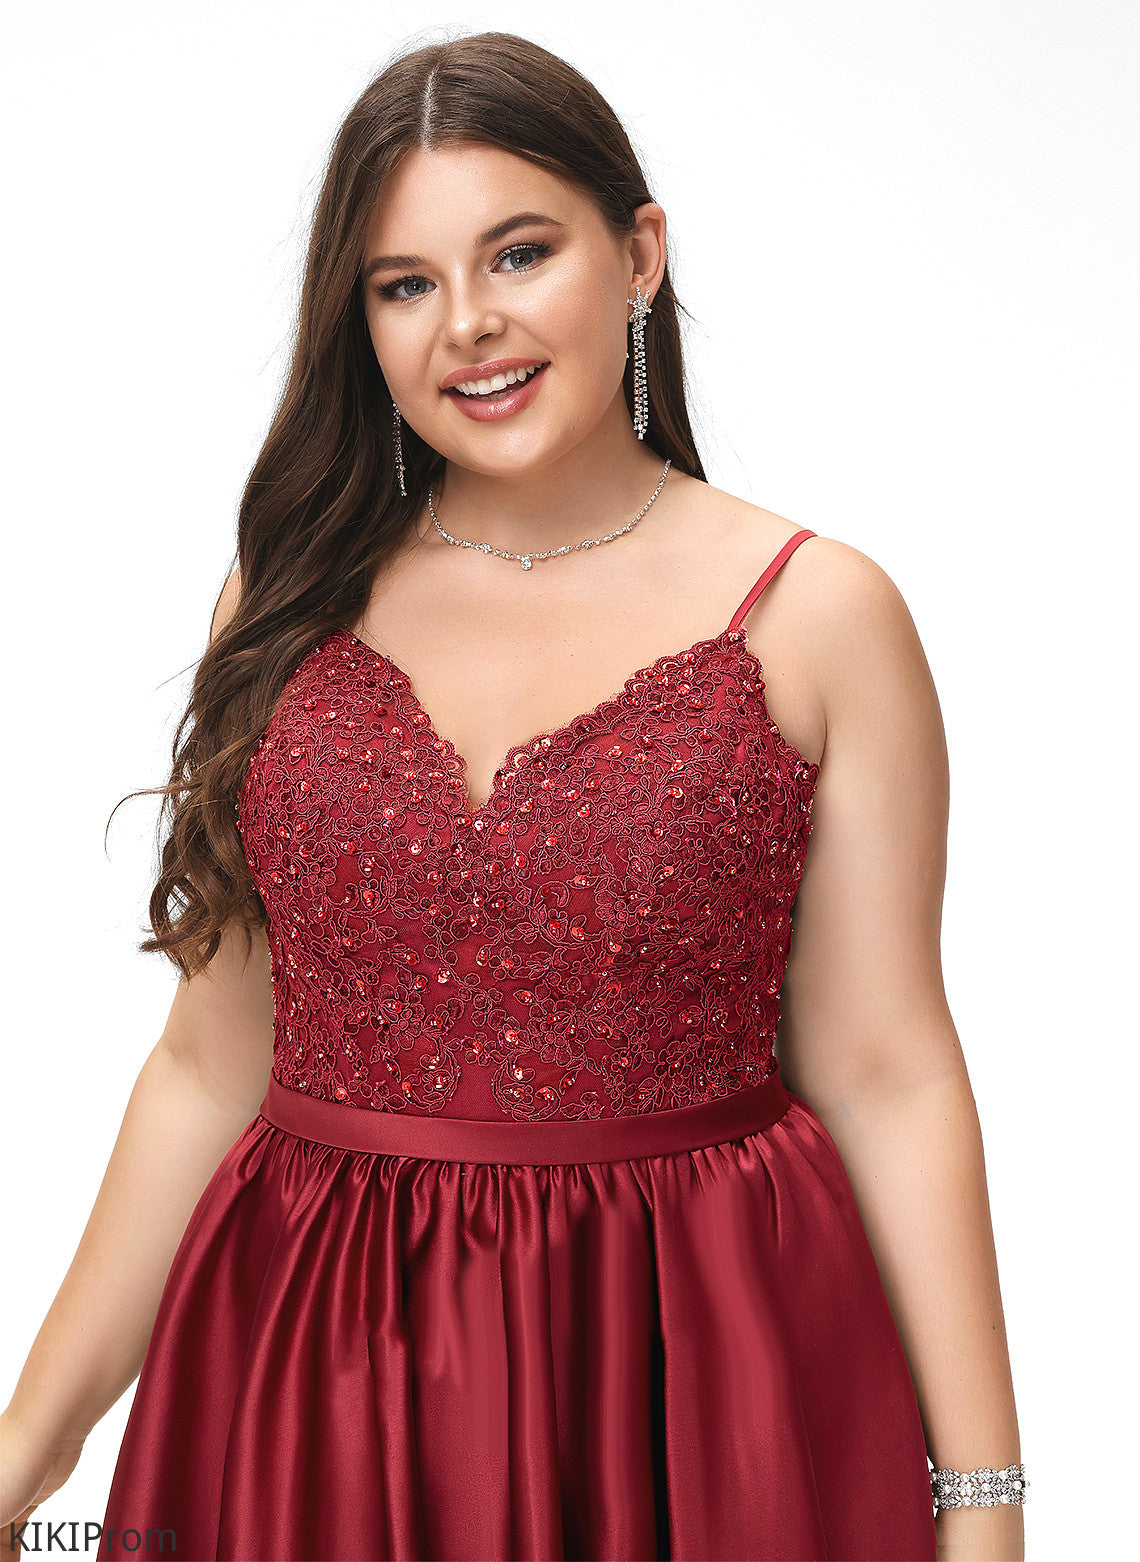 Lace With Short/Mini Homecoming V-neck Beading Homecoming Dresses A-Line Maren Satin Dress